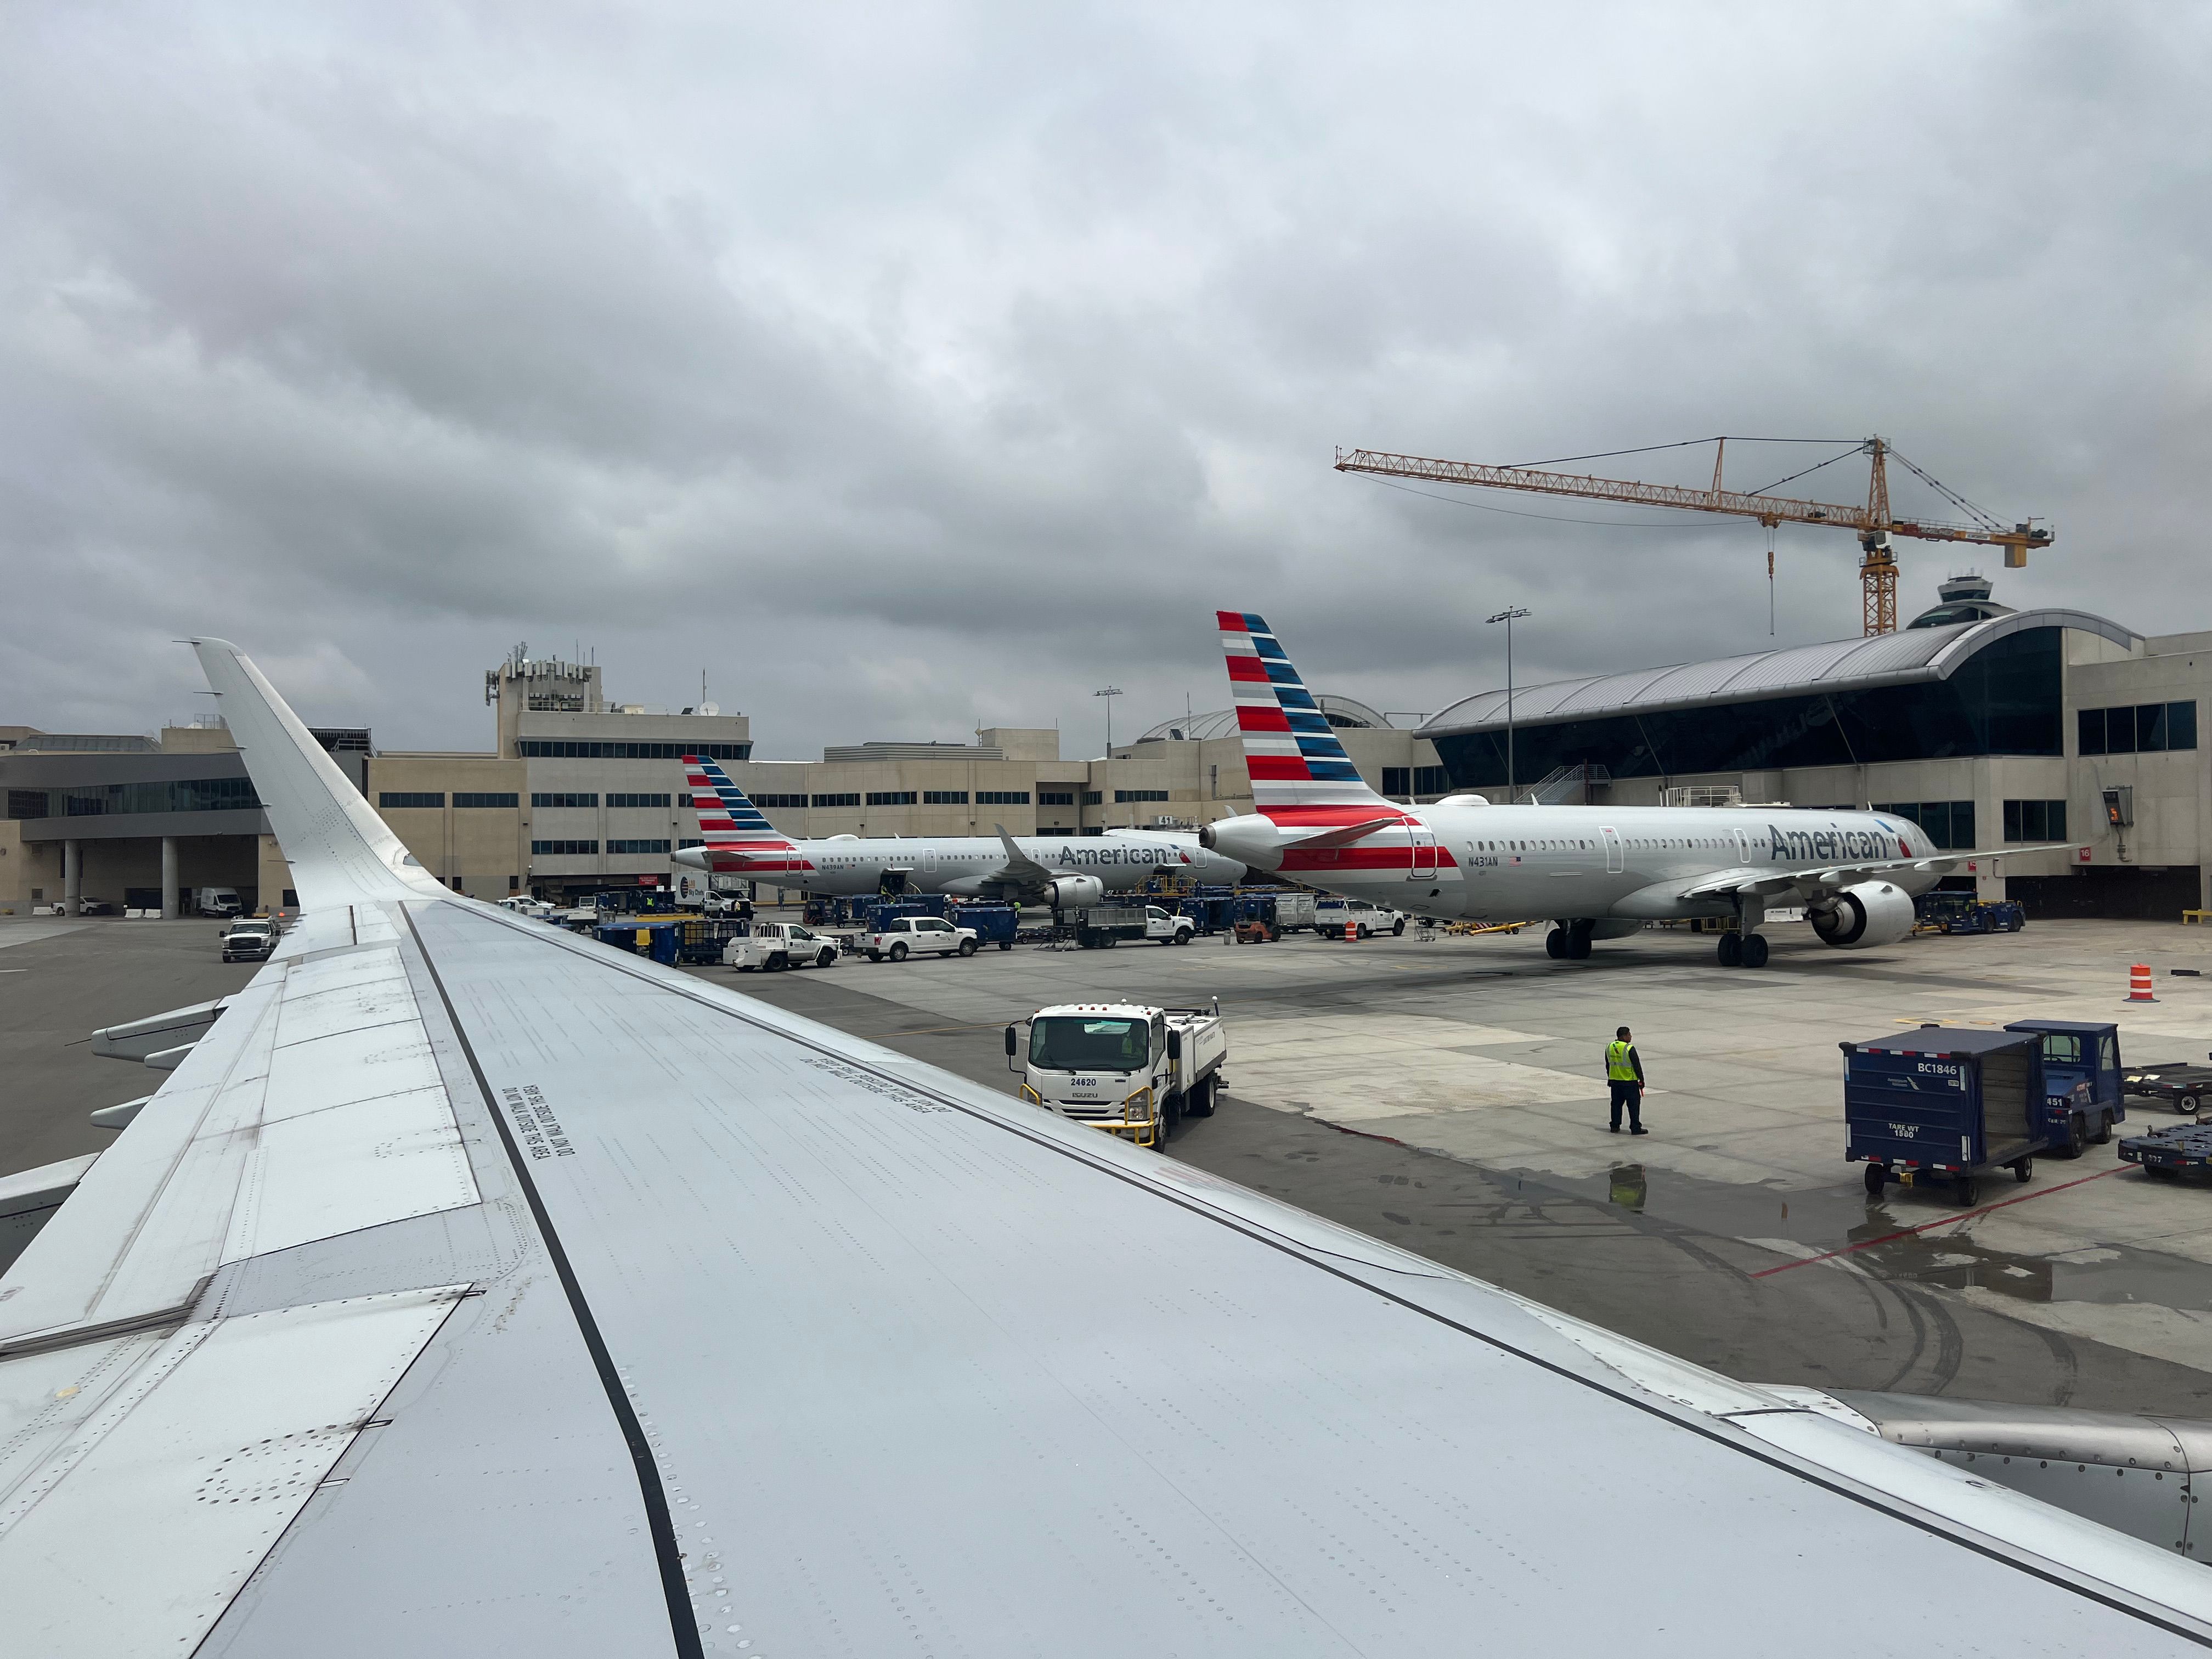 American Airlines planes at Los Angeles Airport